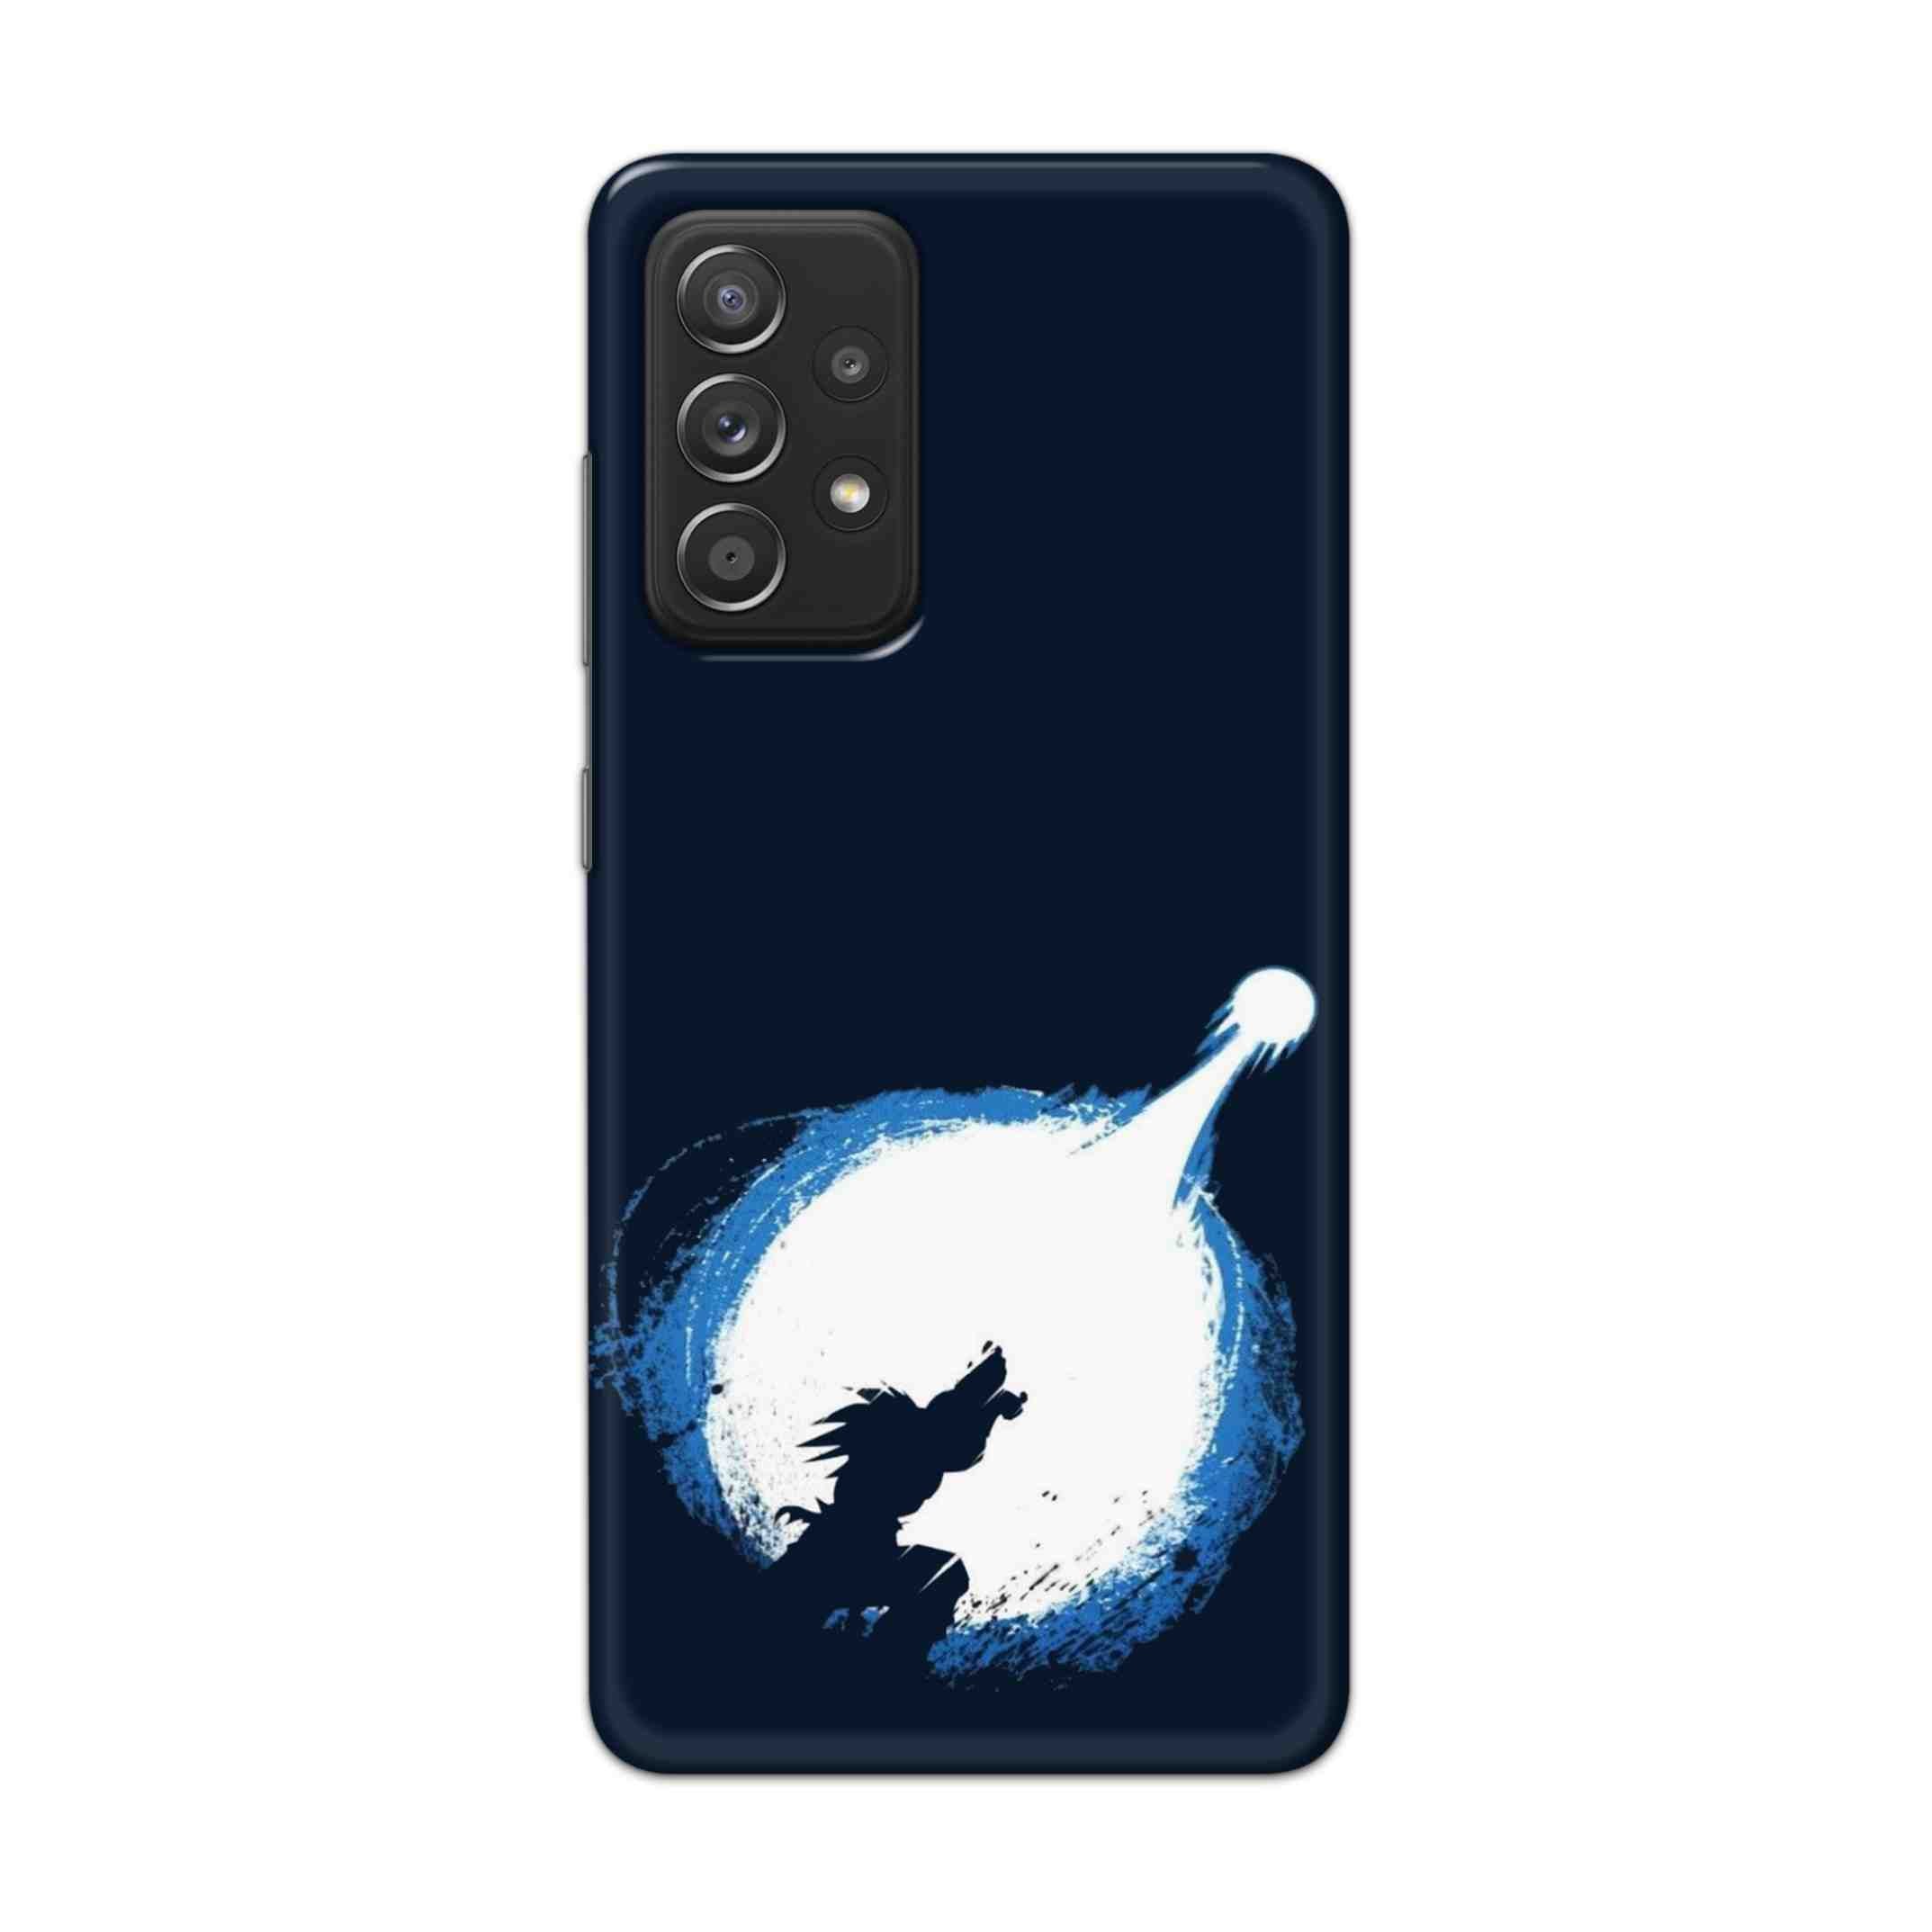 Buy Goku Power Hard Back Mobile Phone Case Cover For Samsung Galaxy A52 Online